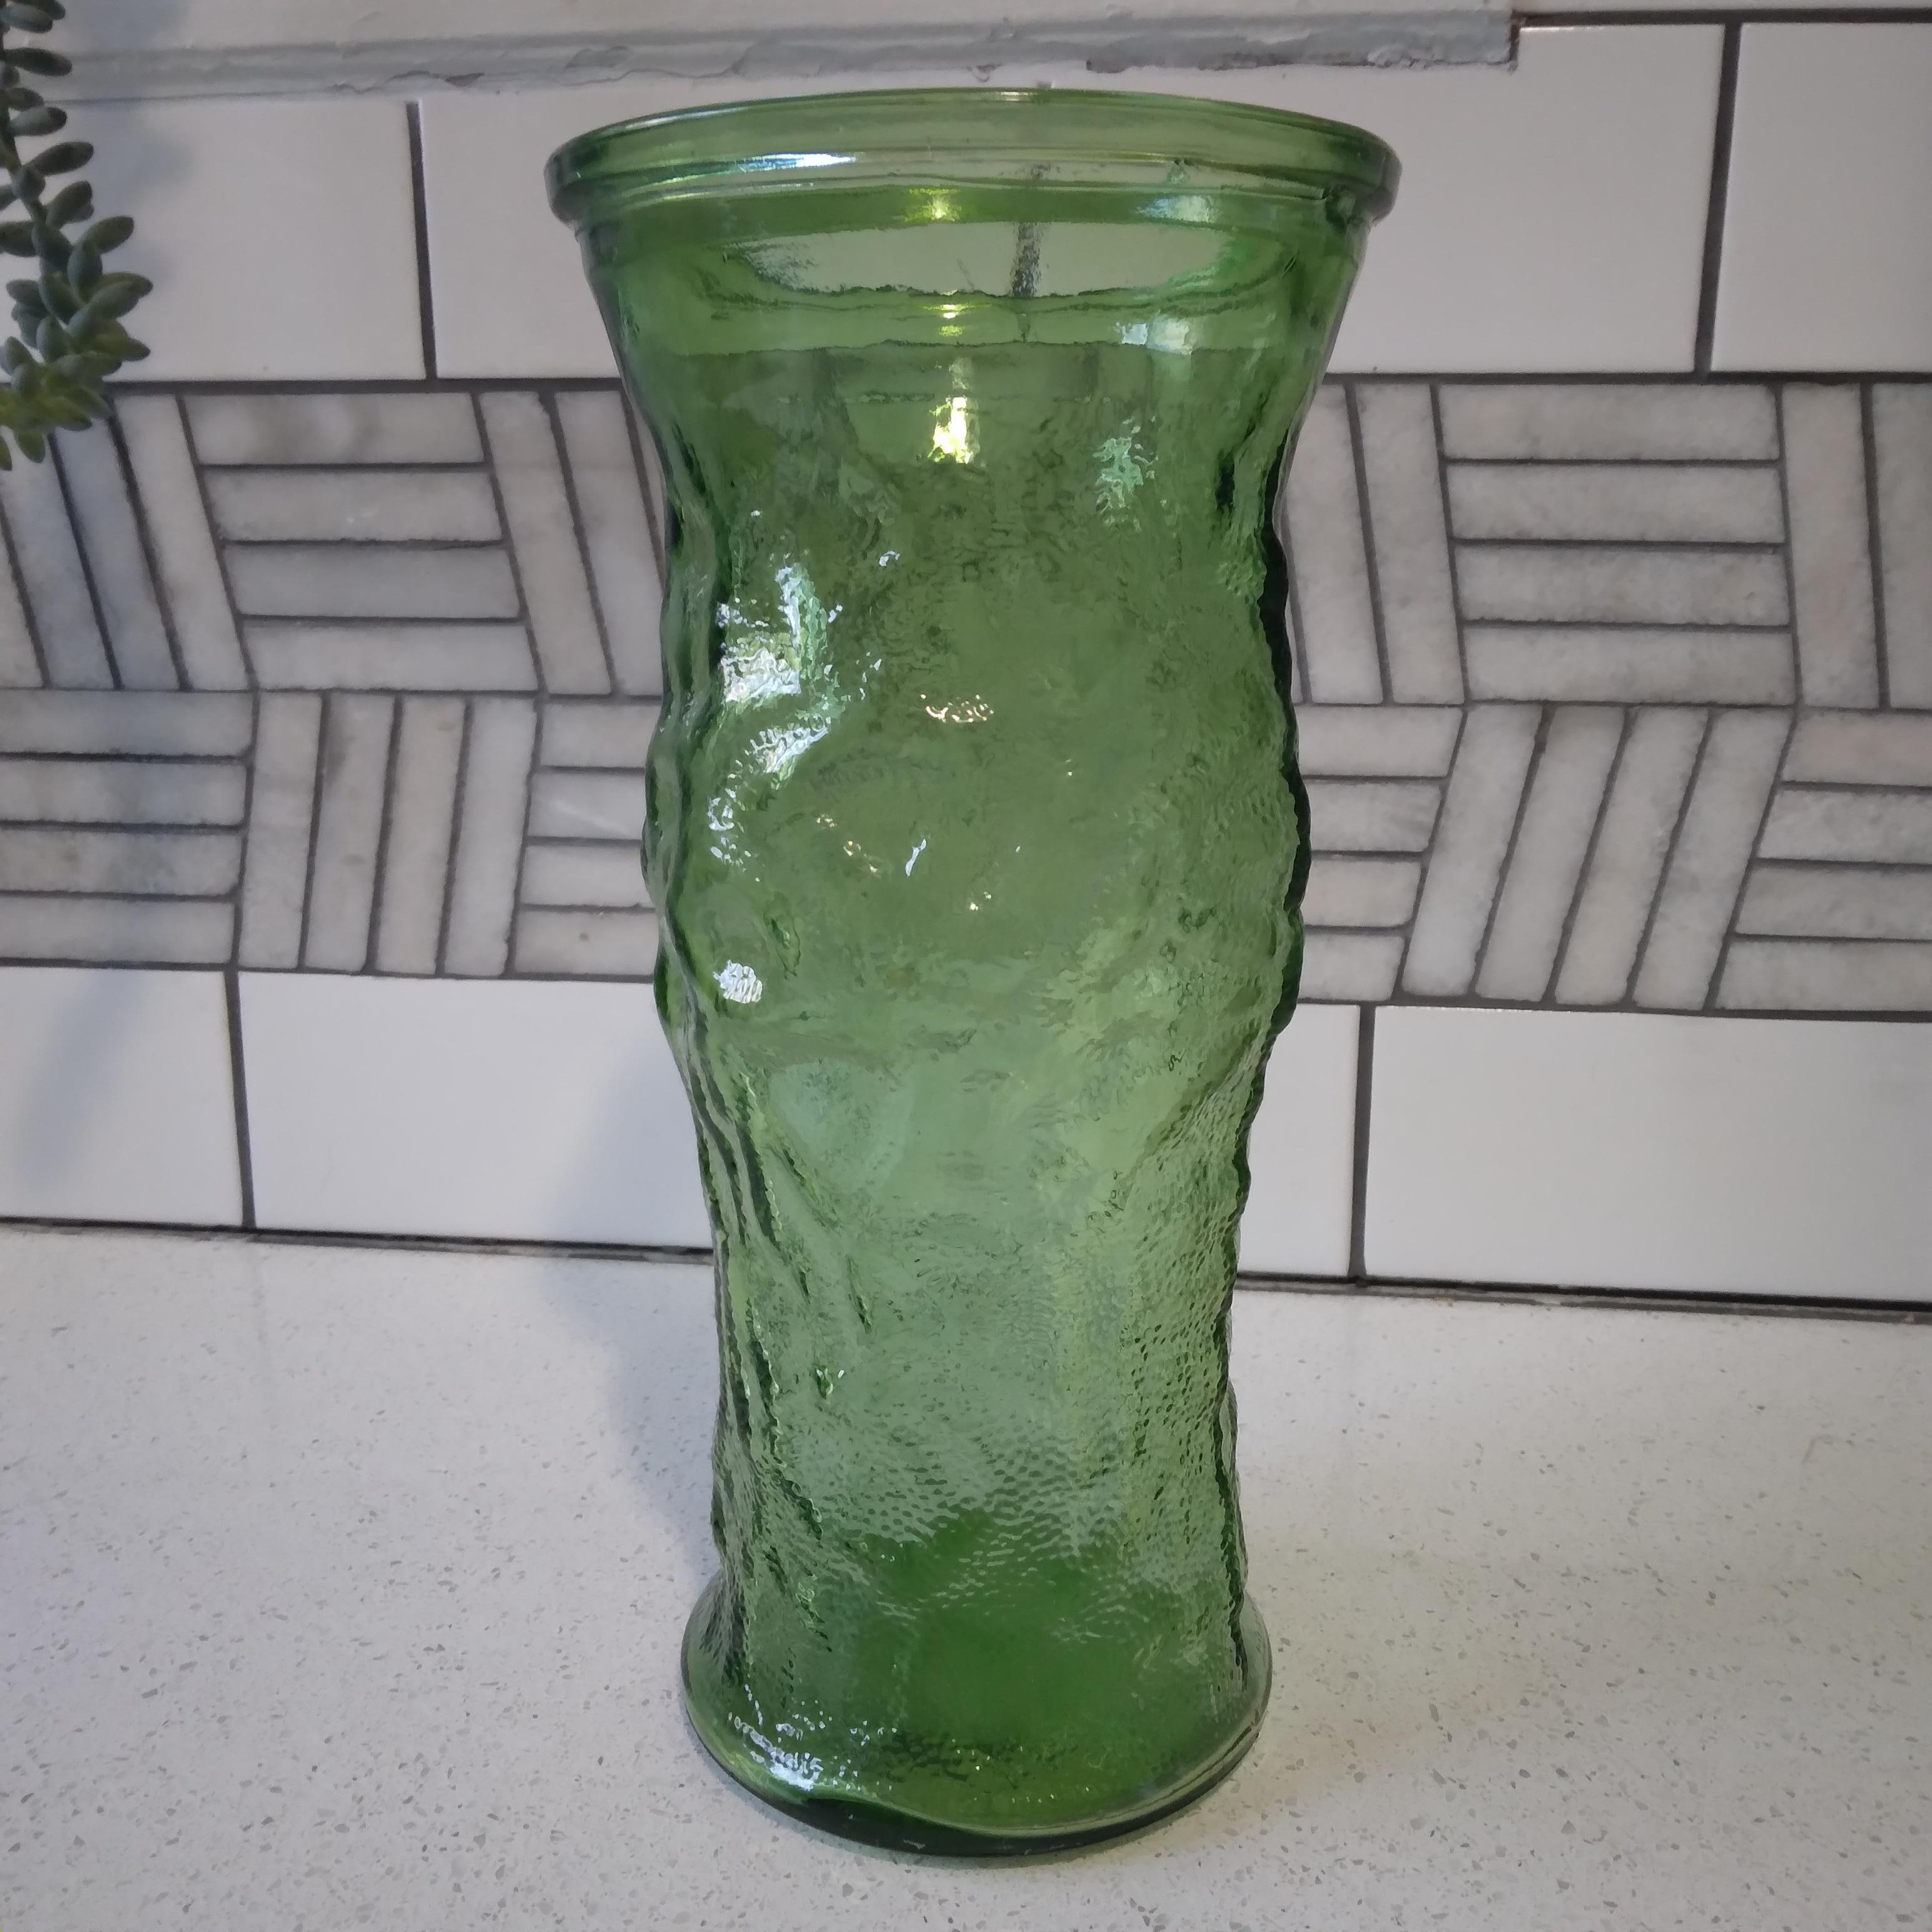 Bottle green glass in a retro crinkle design, this vintage vase is ready to display the beauty of nature. We love her vibrant color and generous curves!   She is large enough to fit a full bouquet and the translucent green with go wonderfully with a